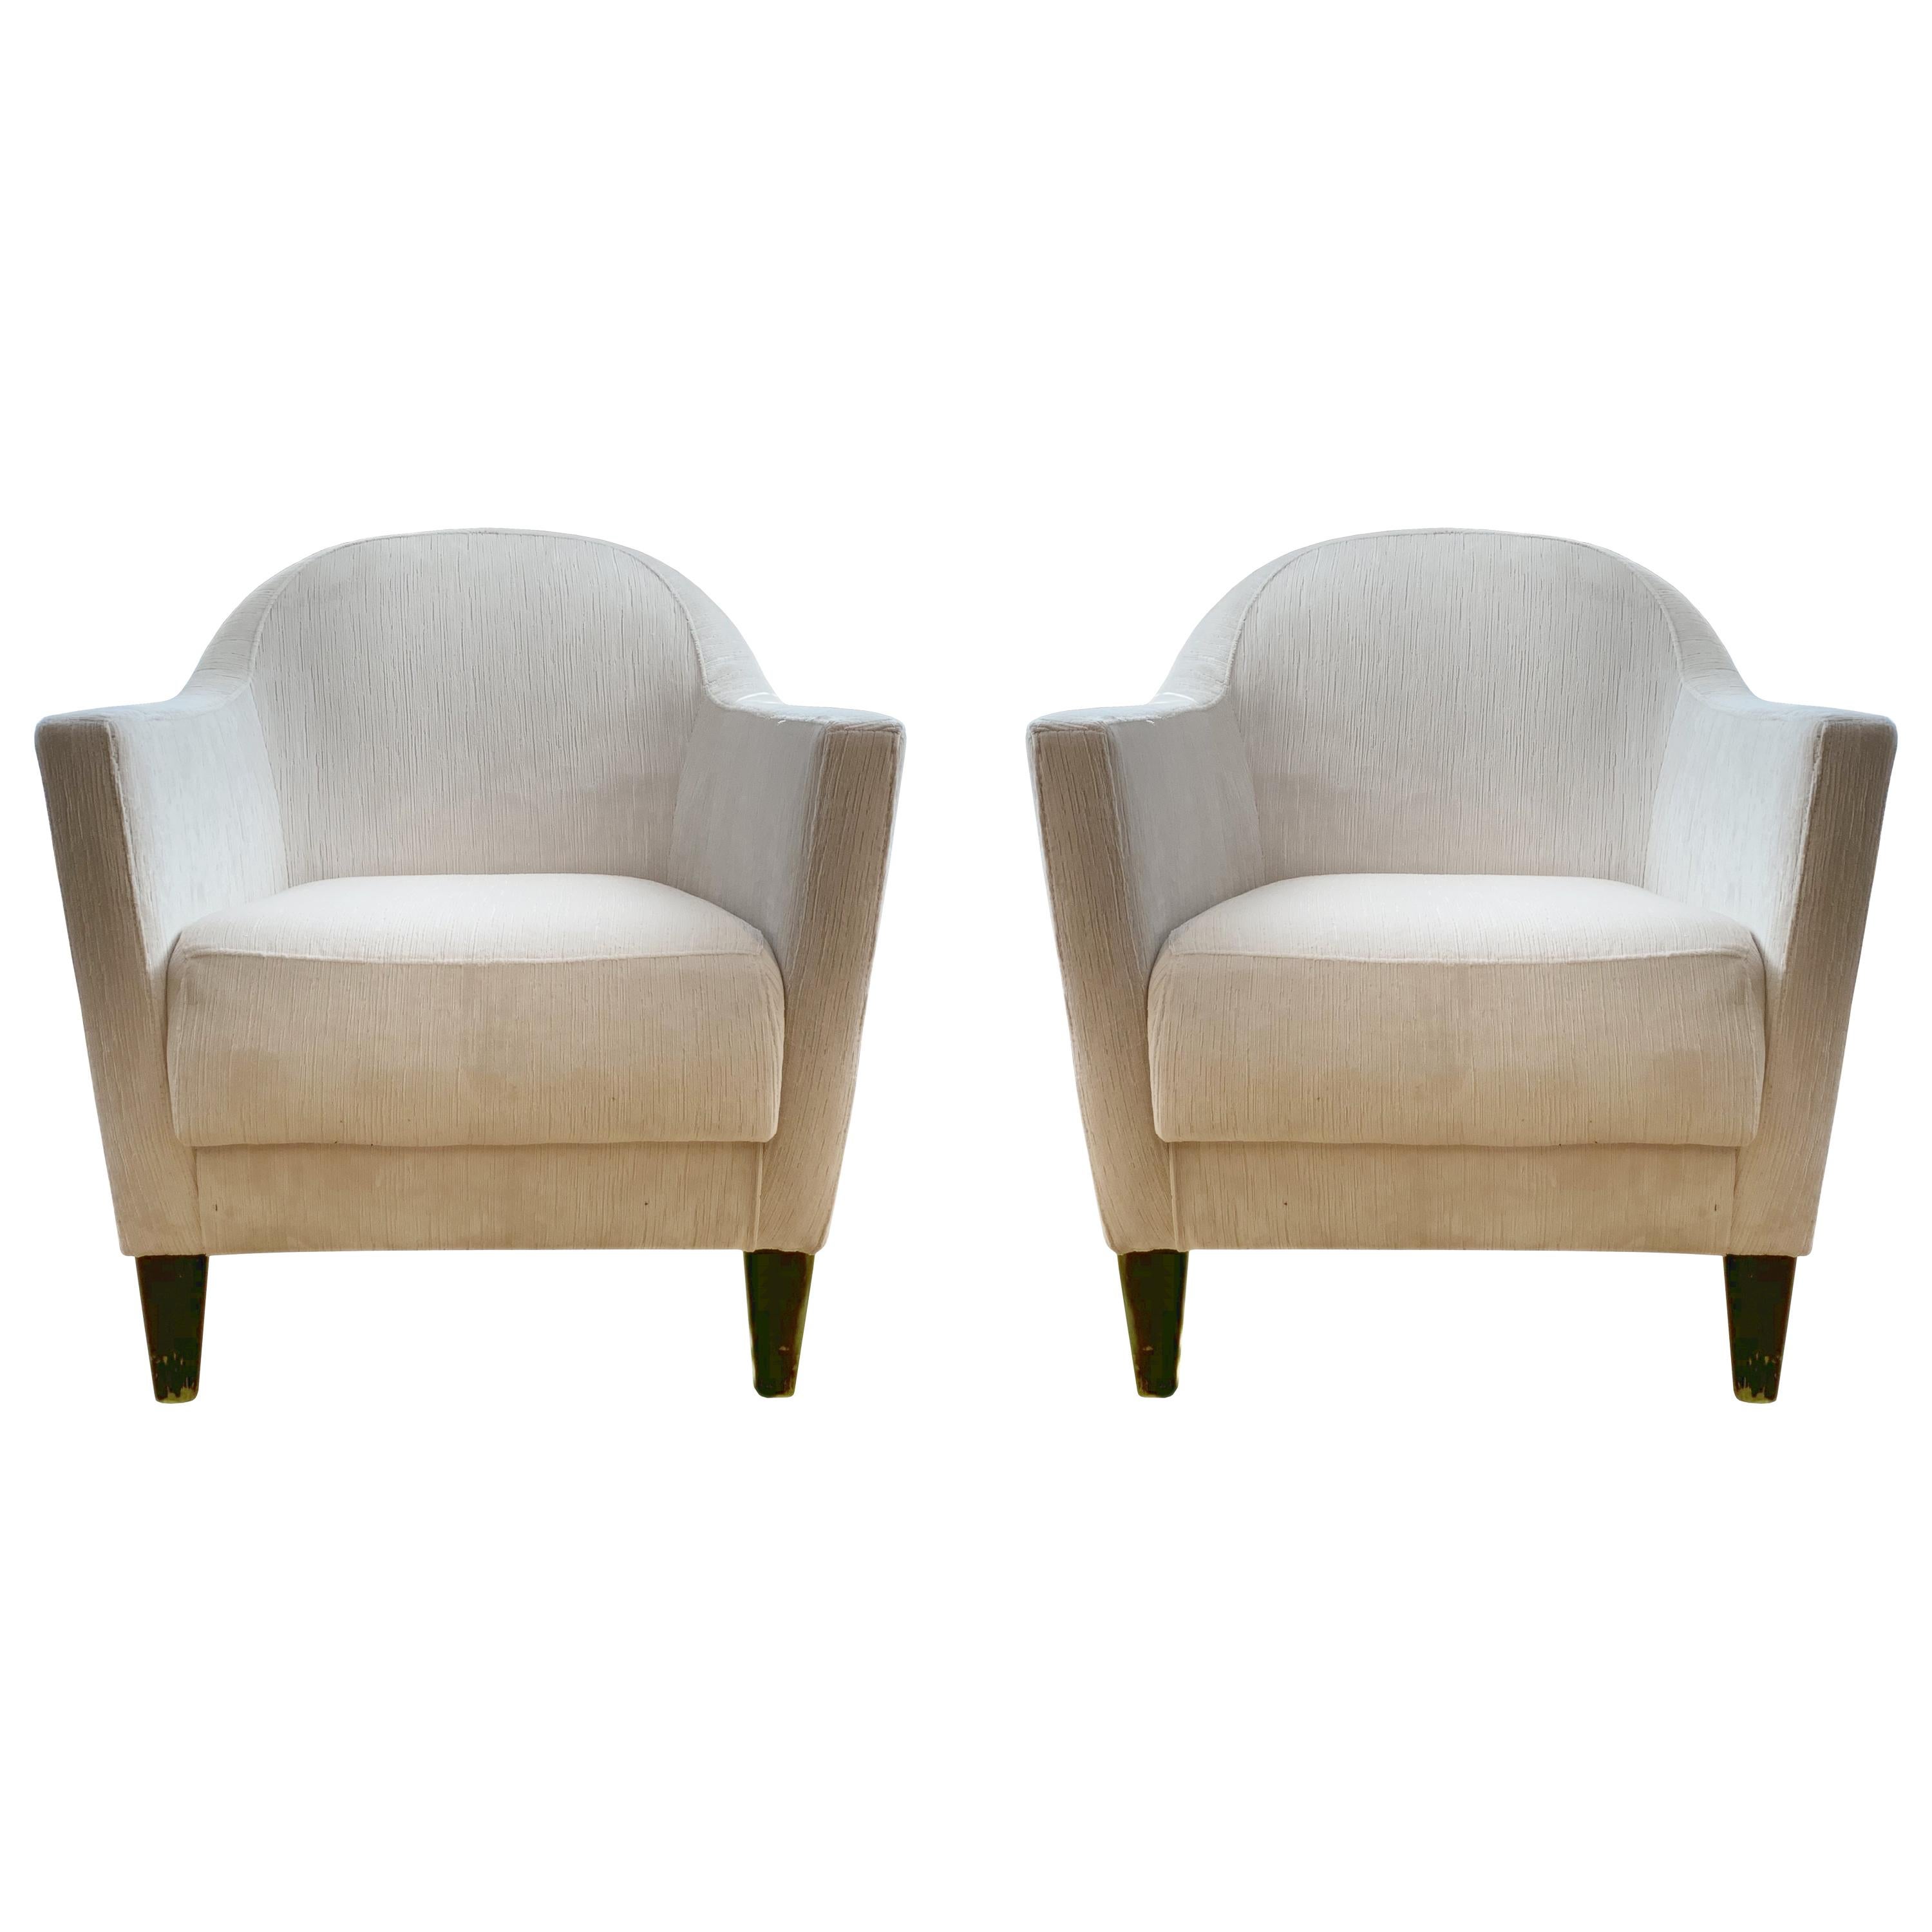 Pair of 1960s Armchairs in Cream Color Fabric, Newly Upholstered For Sale